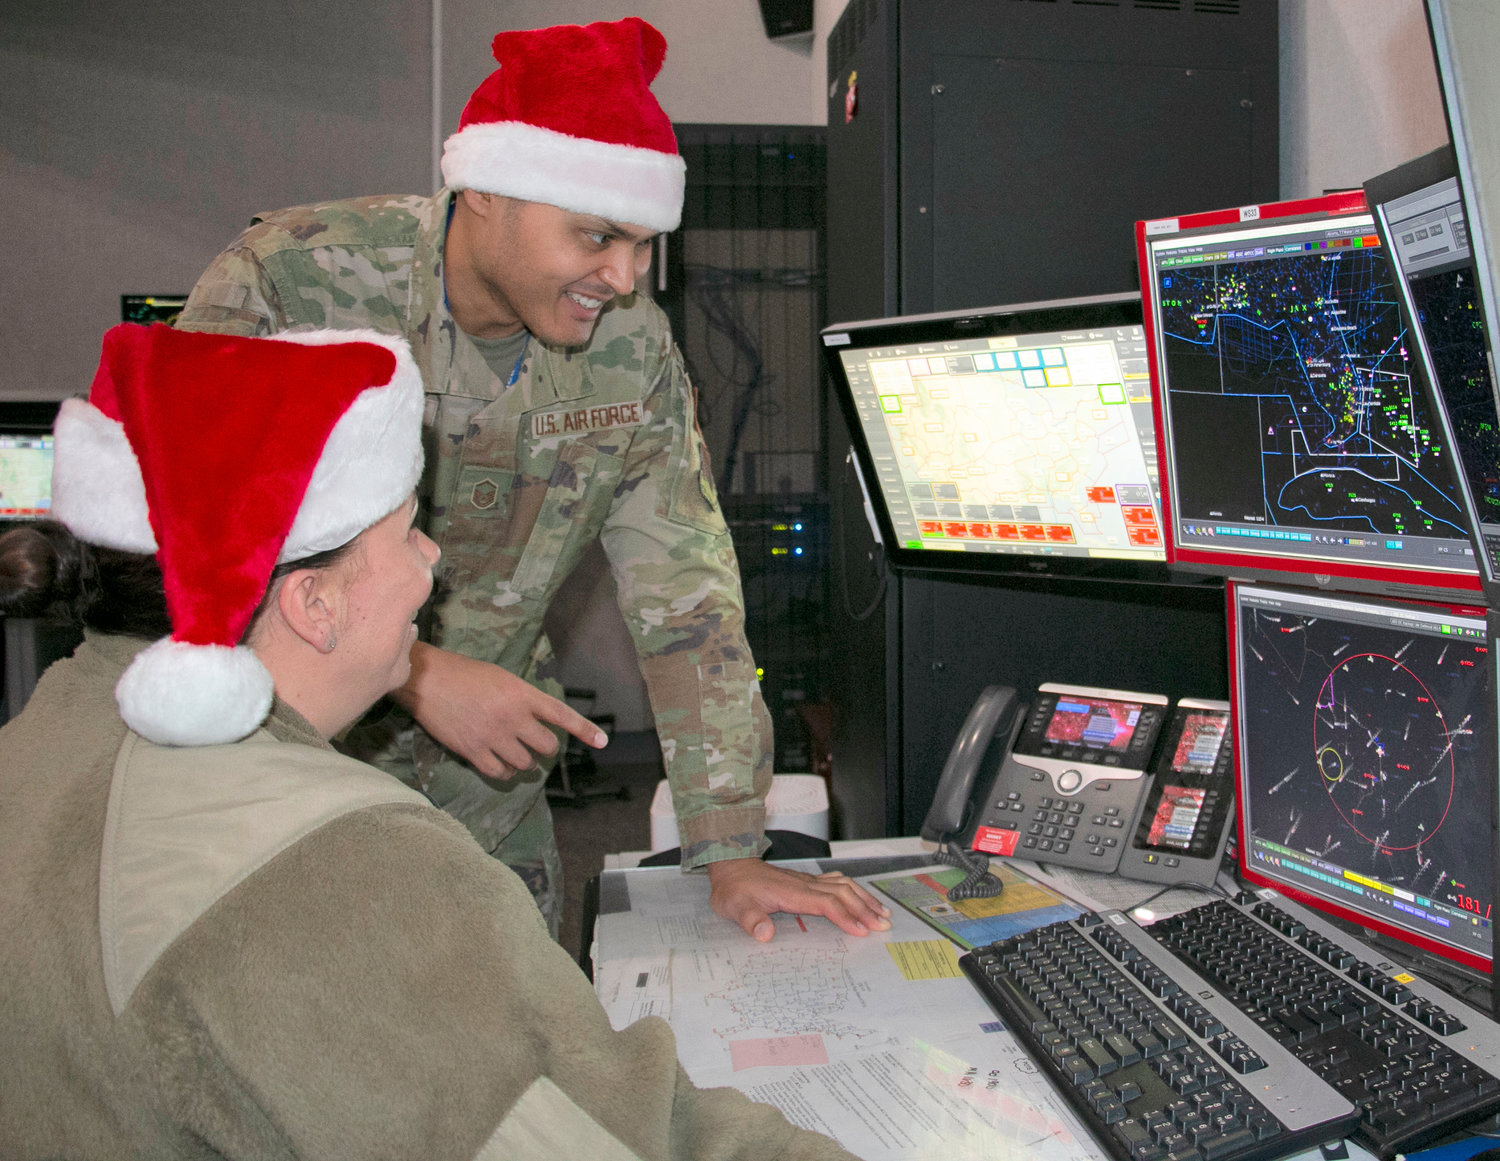 Master Sgt. Brian Burgess, standing, and Maj. Bonnie Bosworth of the New York Air National Guard’s 224th Air Defense Squadron, train for Santa tracking operations on Dec. 16 at the Eastern Air Defense Sector in Rome. Part of the North American Aerospace Defense Command (NORAD), EADS is responsible for the air defense of the eastern U.S.